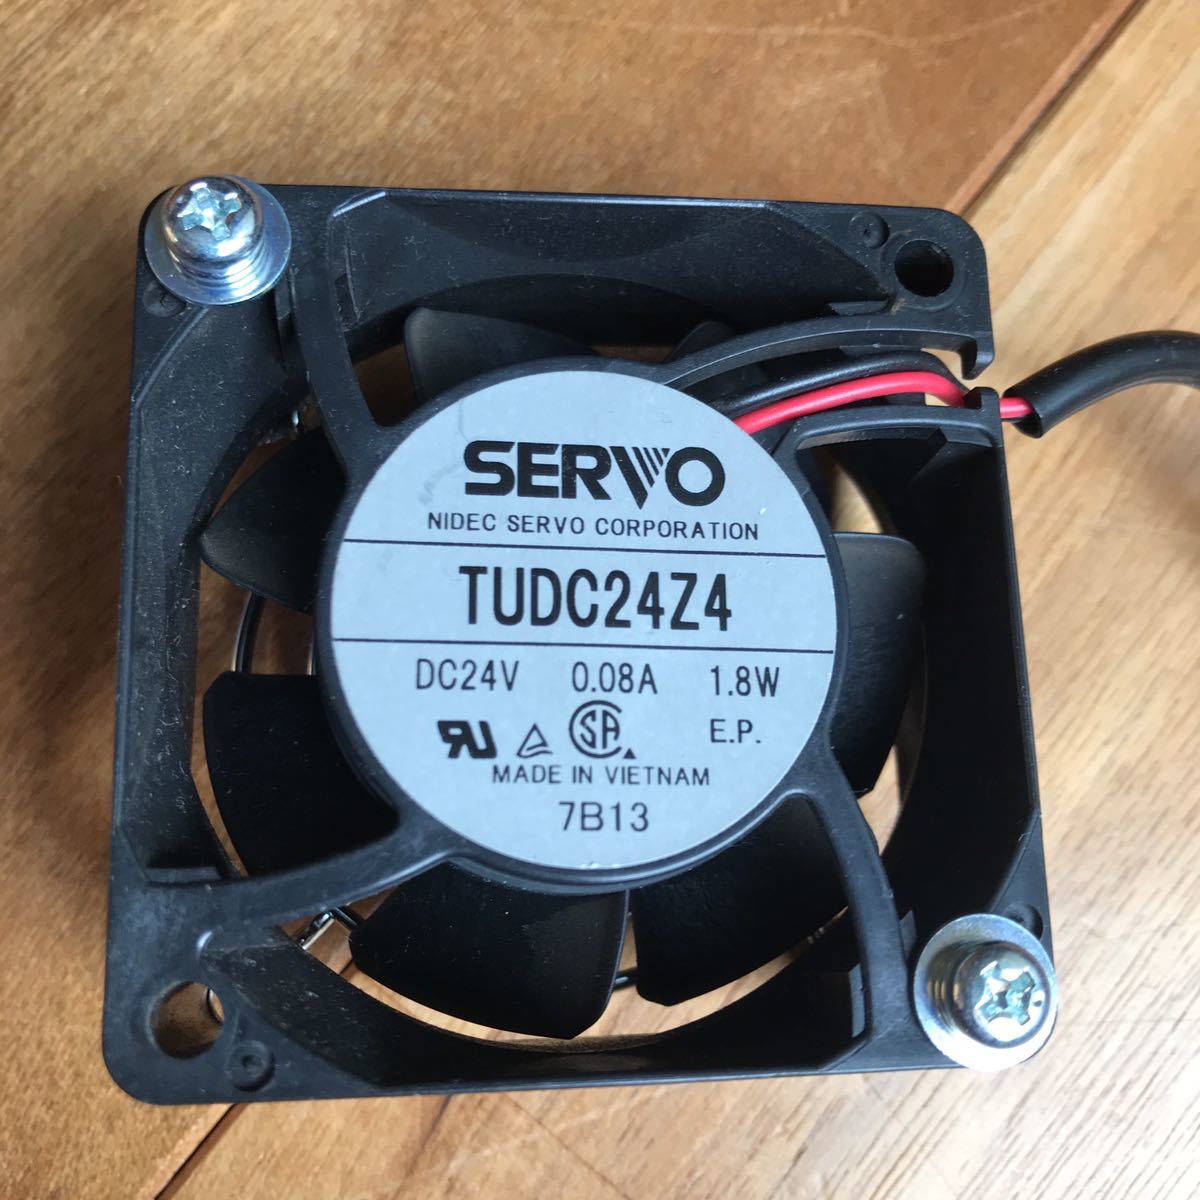 DC fan DC24V drive 60mm angle 25mm thickness 4300r/min cooling fan cooling fan Japan servo TUDC24Z4 used finger guard attaching that 1